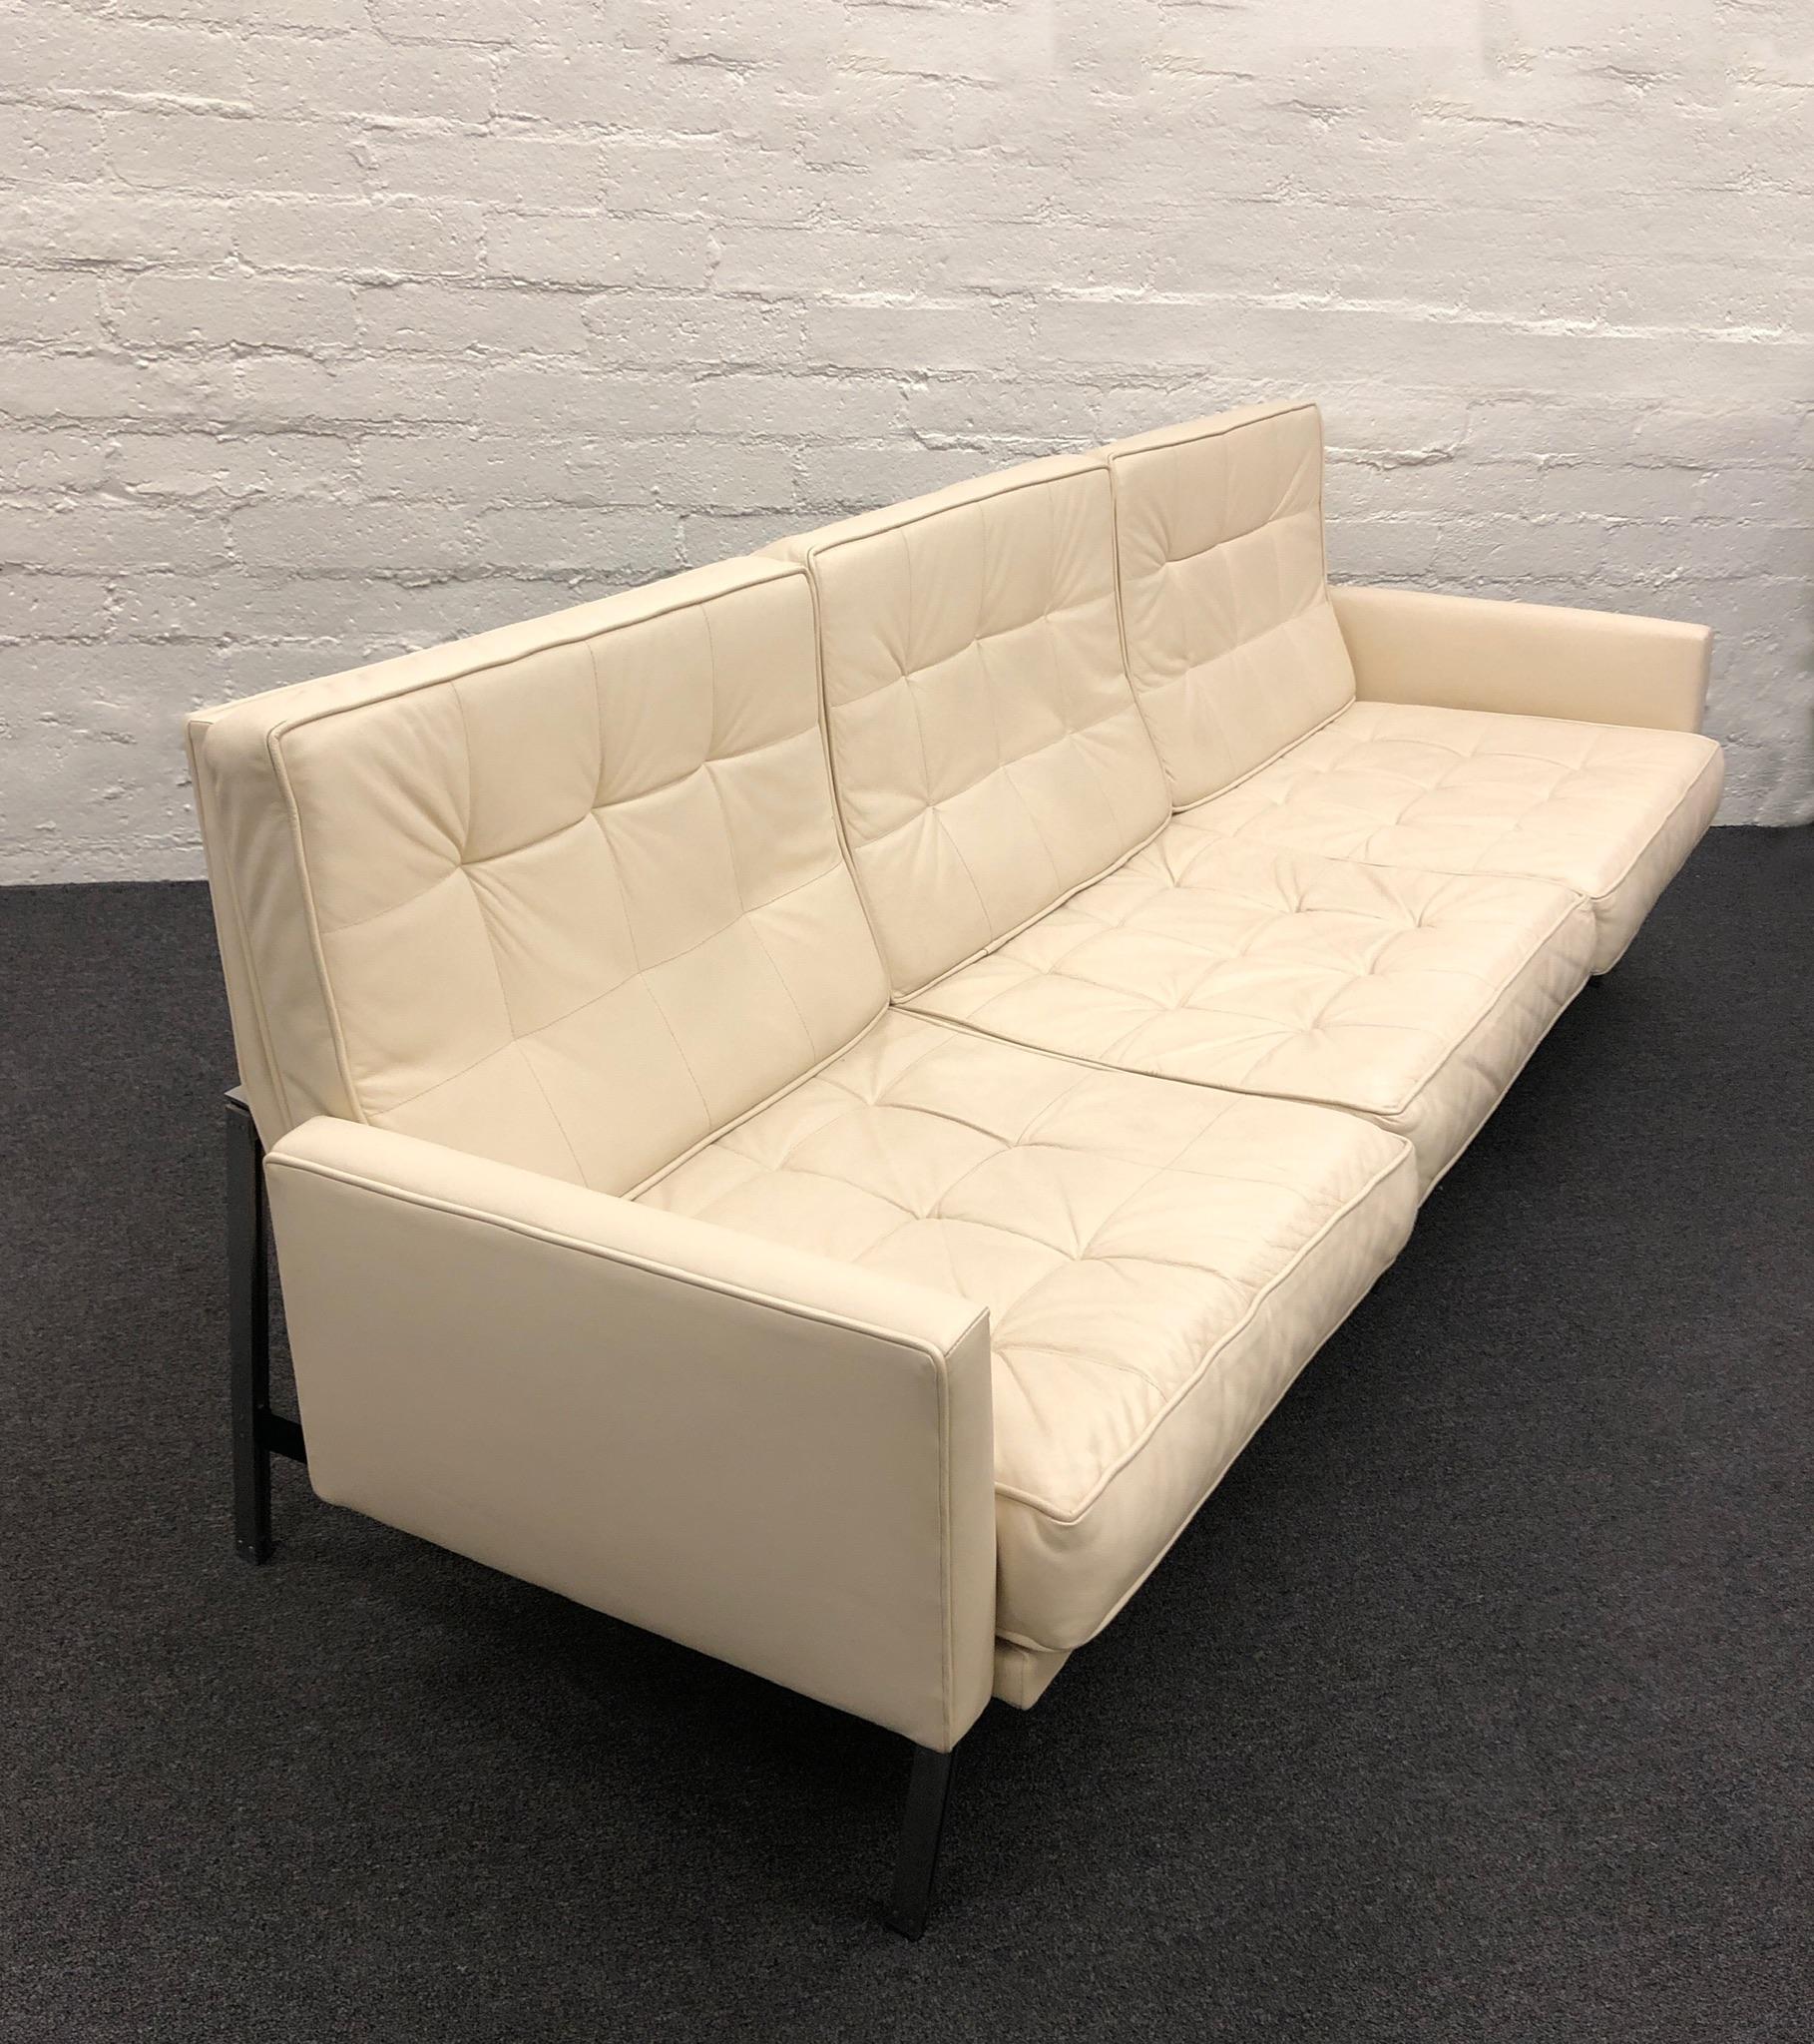 Off white leather and brush stainless steel parallel bar sofa designed by Florence Knoll for Knoll.
This came out of the Australian embassy and retains their label. 
This was  reupholstered about 10 years ago. 
Was used only in winter home. Lounge